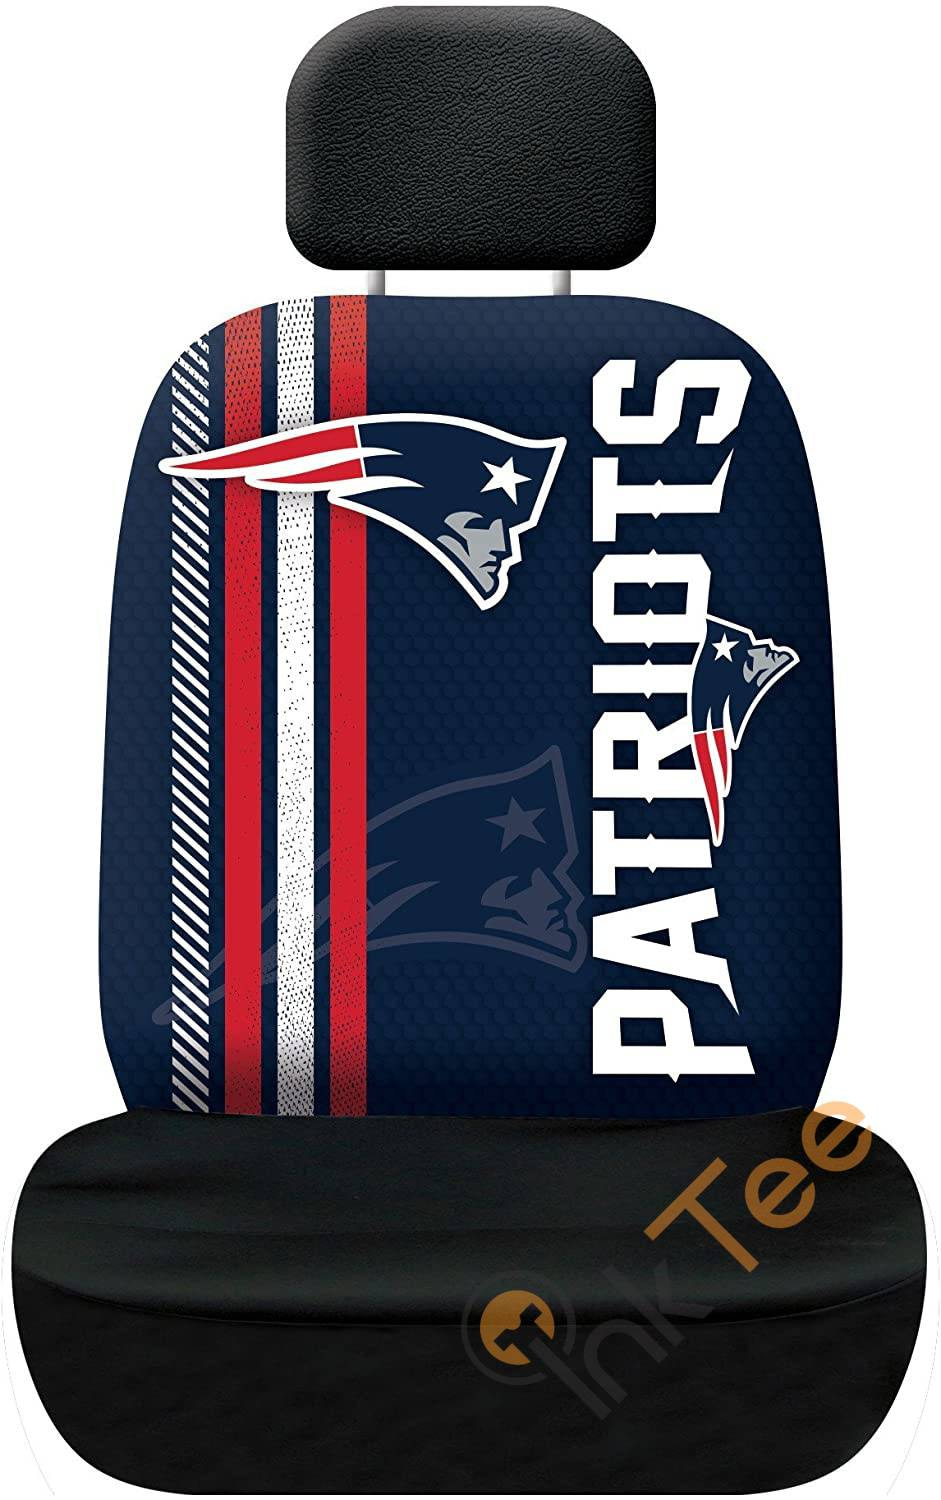 Nfl New England Patriots Team Seat Cover